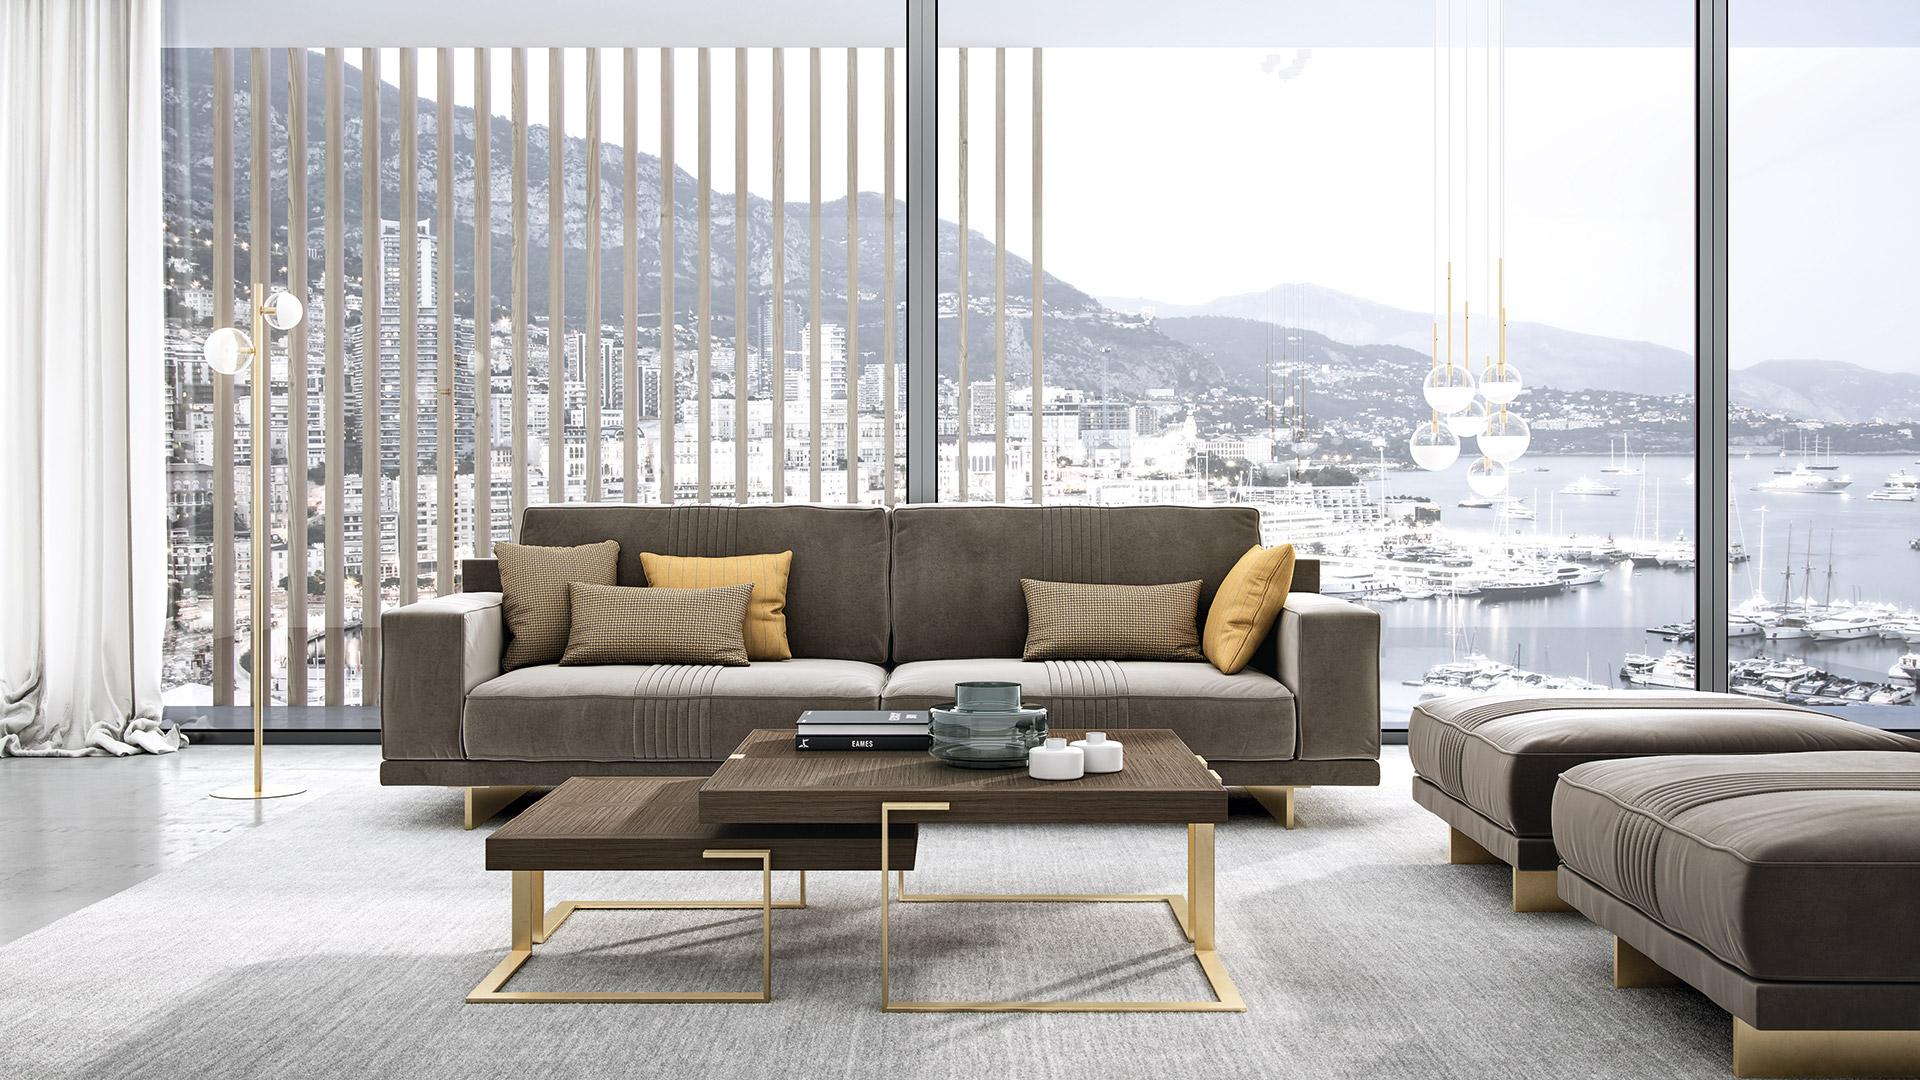 Four seater sofa characterized by a soft backrest perfectly shaped that enhances the comfort.
The metal base is in gold finishing and improves the modern look of the sofa.
On the back and on the seating complete the design thanks to pipeline